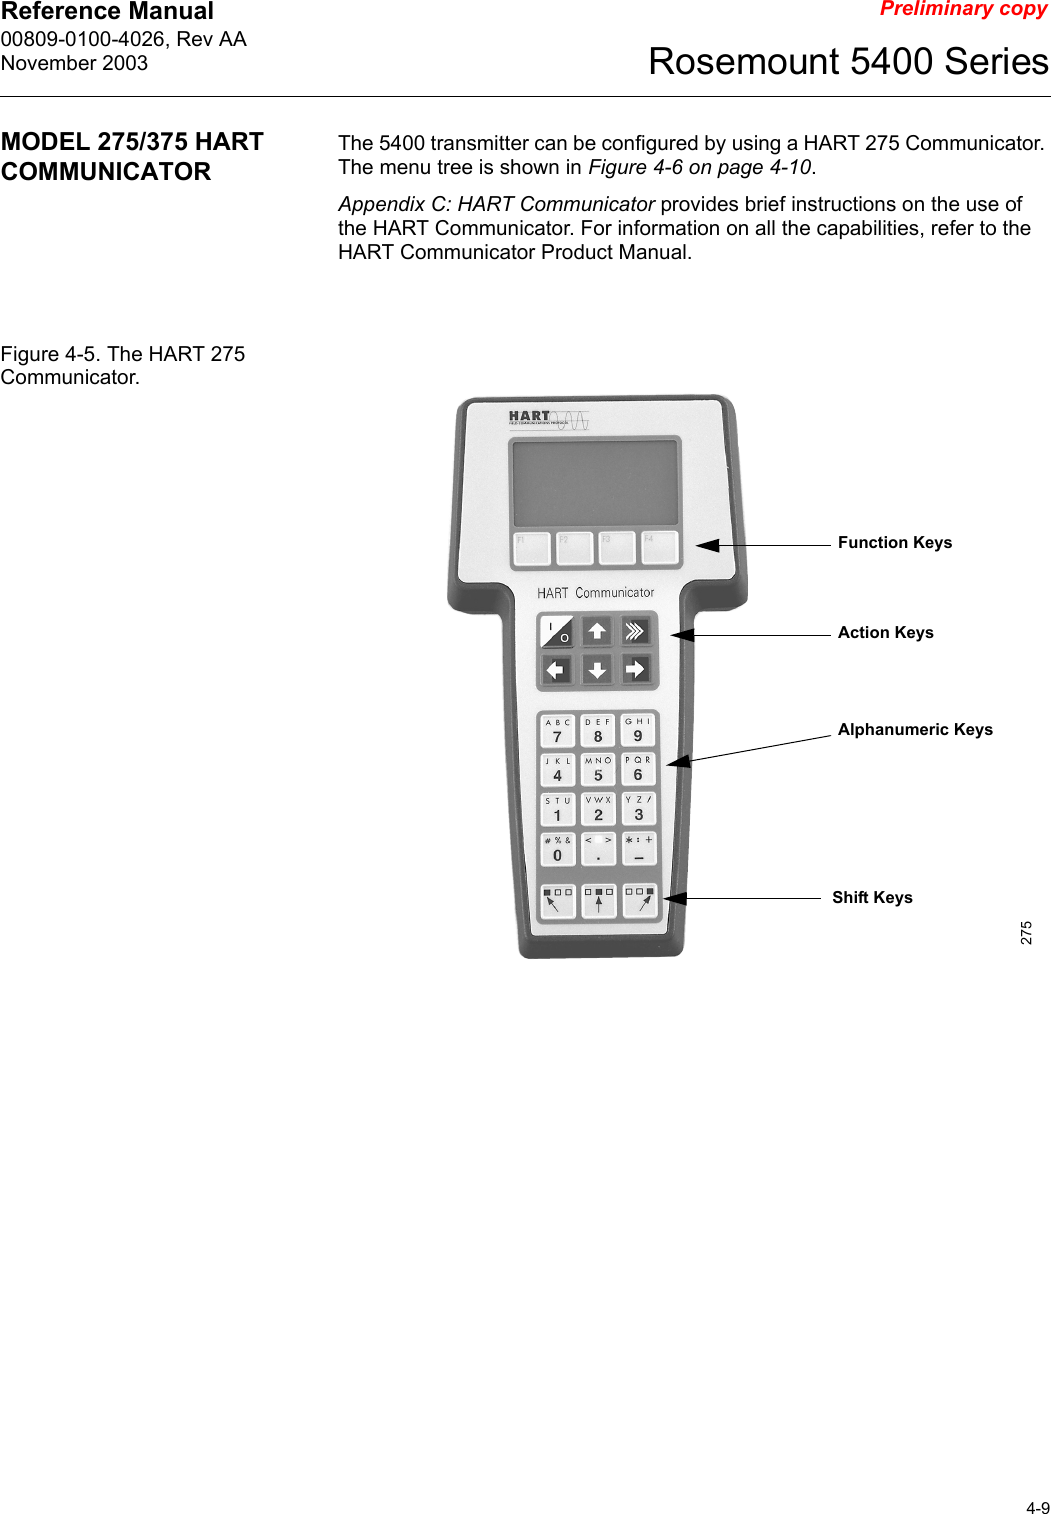 Reference Manual 00809-0100-4026, Rev AANovember 20034-9Rosemount 5400 SeriesPreliminary copyMODEL 275/375 HART COMMUNICATORThe 5400 transmitter can be configured by using a HART 275 Communicator. The menu tree is shown in Figure 4-6 on page 4-10.Appendix C: HART Communicator provides brief instructions on the use of the HART Communicator. For information on all the capabilities, refer to the HART Communicator Product Manual.Figure 4-5. The HART 275 Communicator.Function KeysAction KeysAlphanumeric KeysShift Keys275